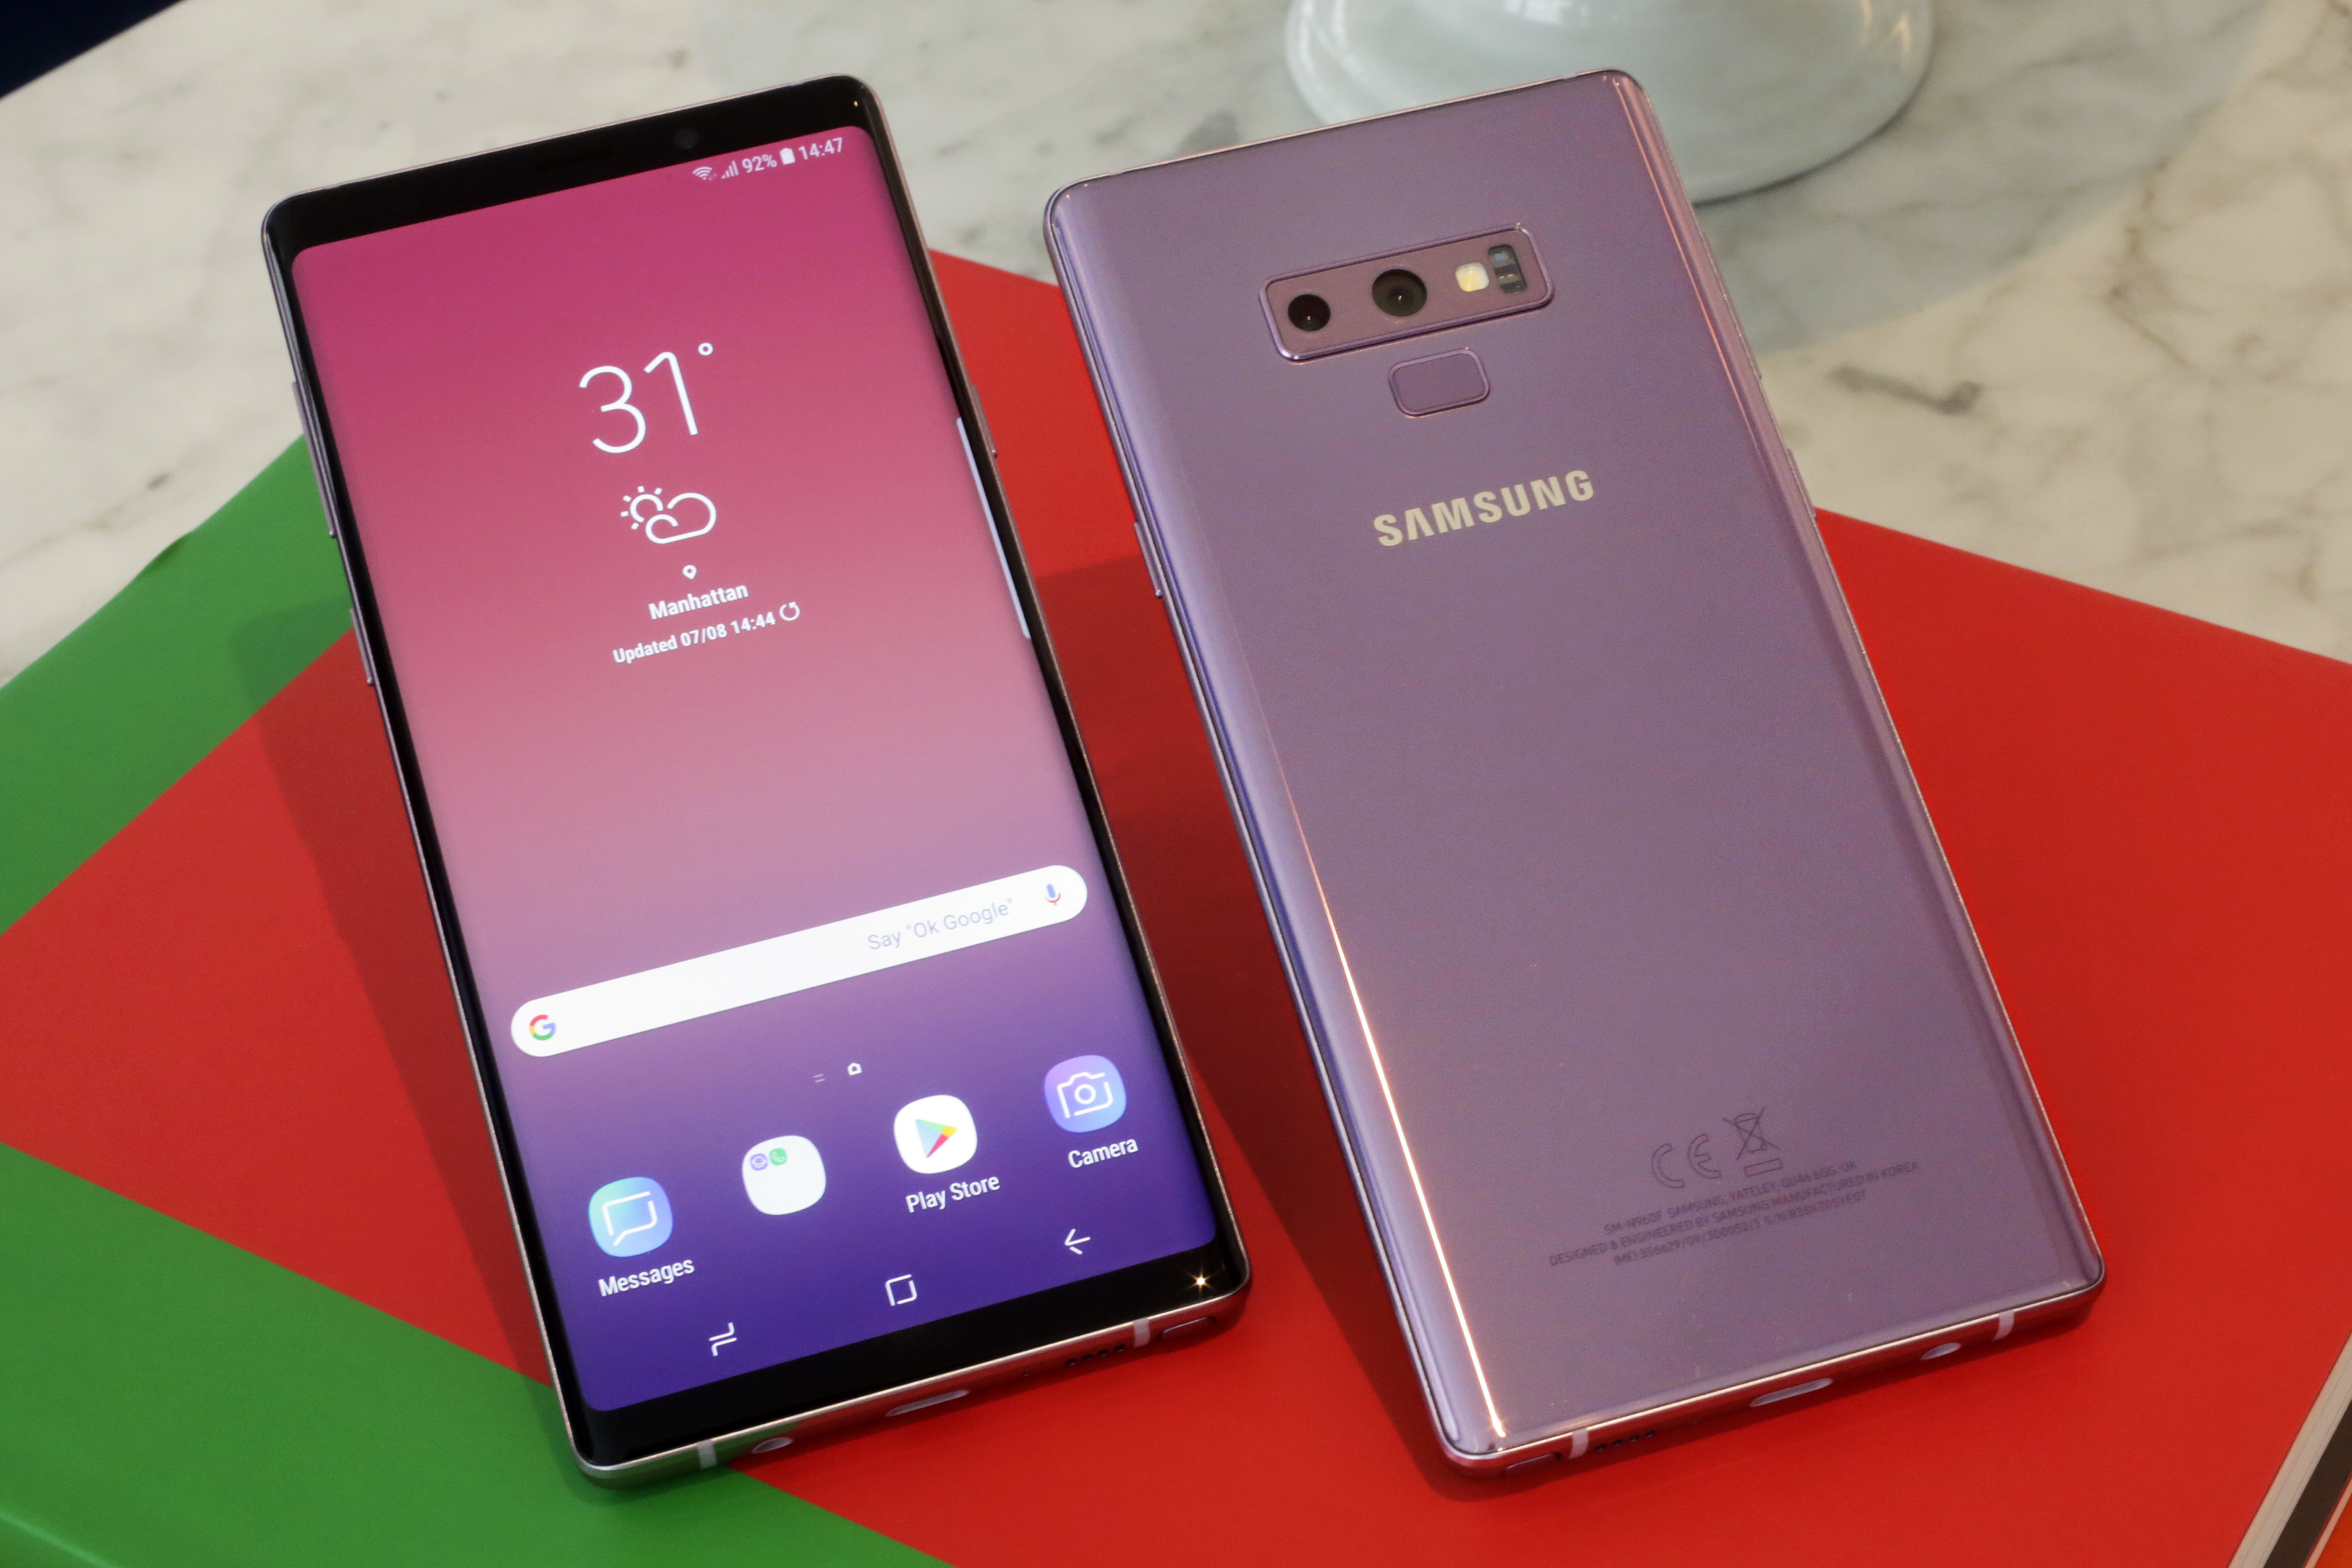 Samsung's New Phone Shows How Hardware Innovation has Slowed 5G